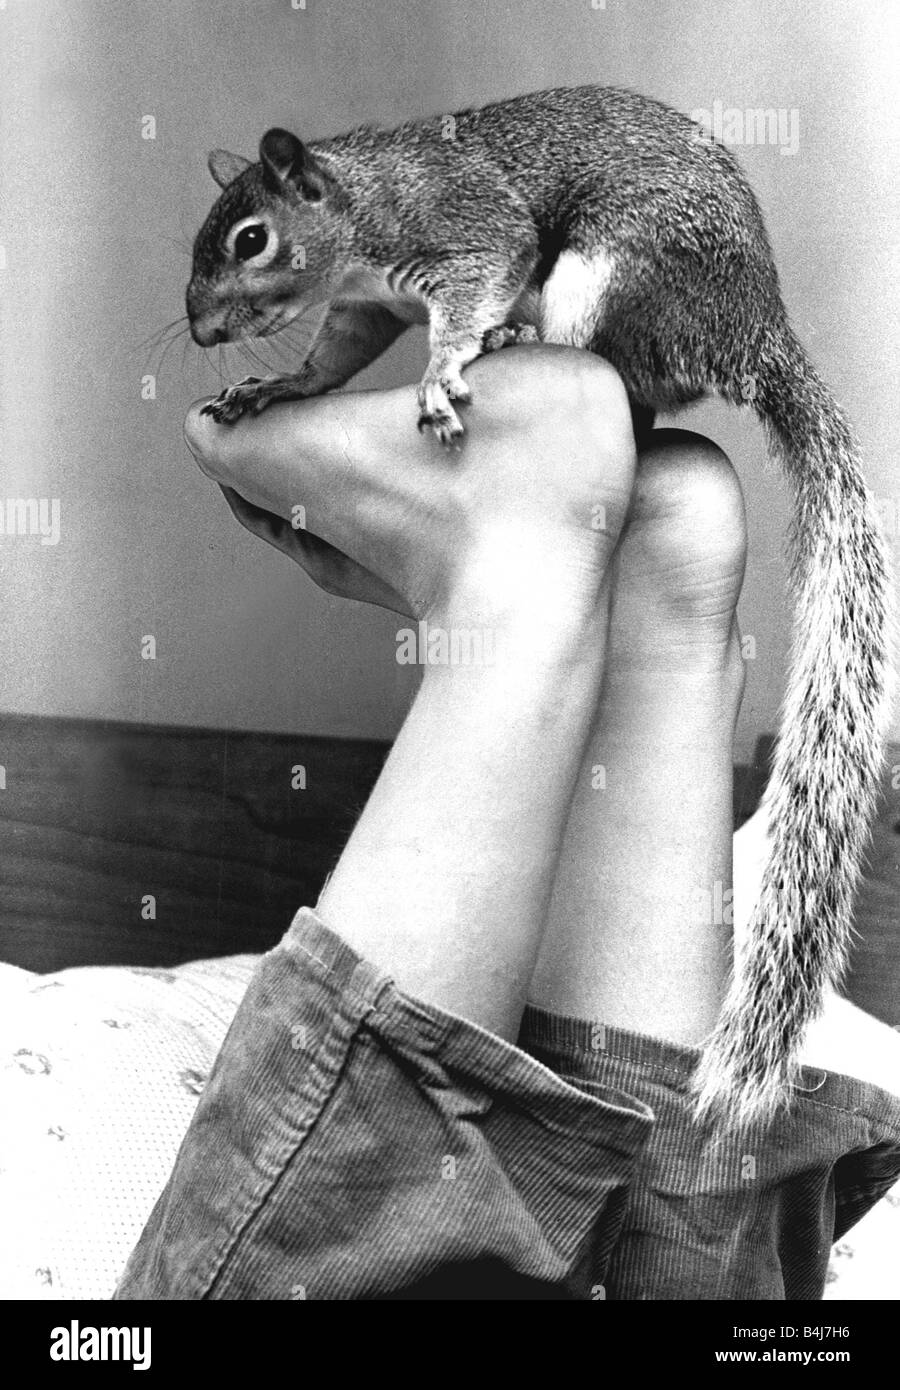 Martini the brown squirrel is also called Twinkletoes He earned that name by coming each morning through the open bedroom window and waking up schoolgirl Priscilla Sherriff by playfully nibbling her toes squirrel sitting on soles of feet July 1971 1970s Stock Photo